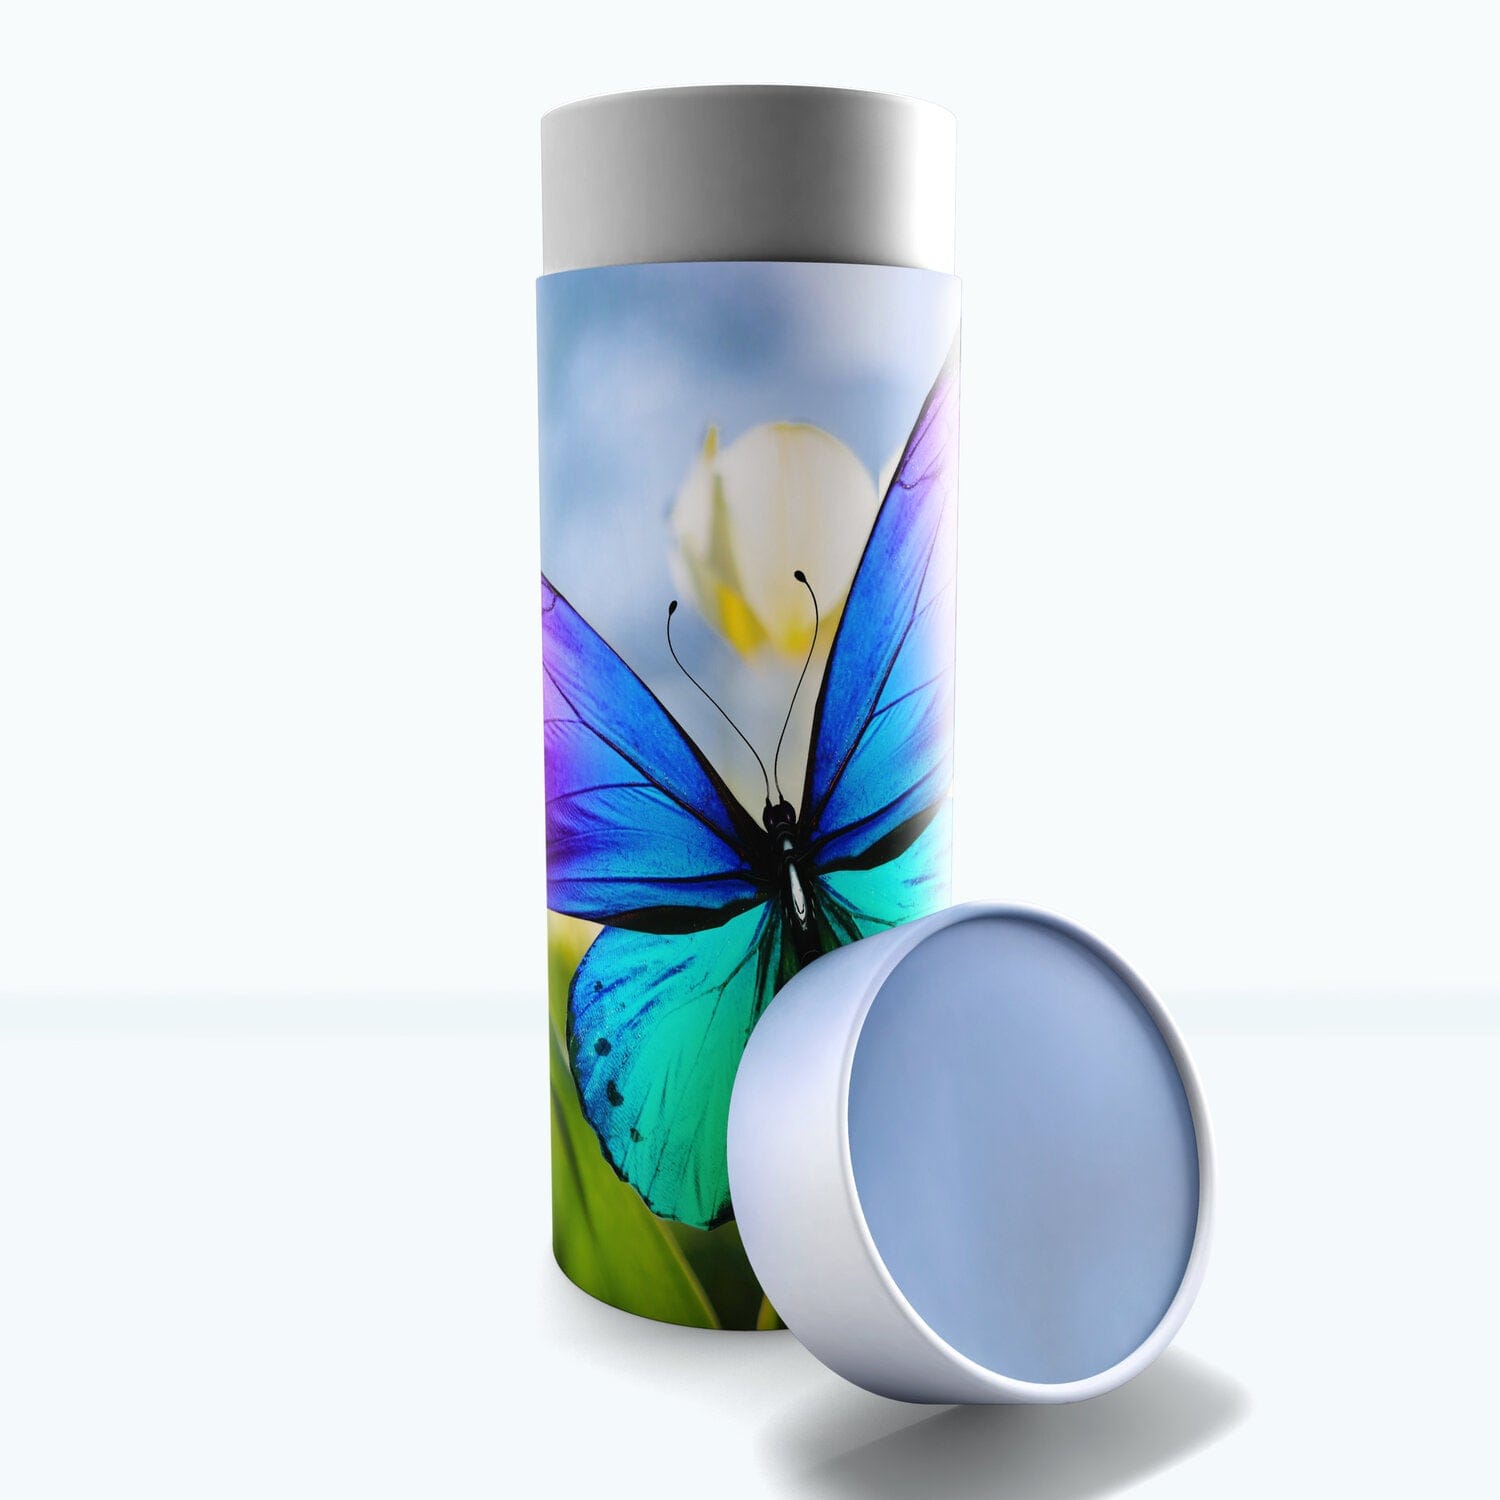 Commemorative Cremation Urns Small Wild Butterflies Biodegradable & Eco Friendly Burial or Scattering Urn / Tube